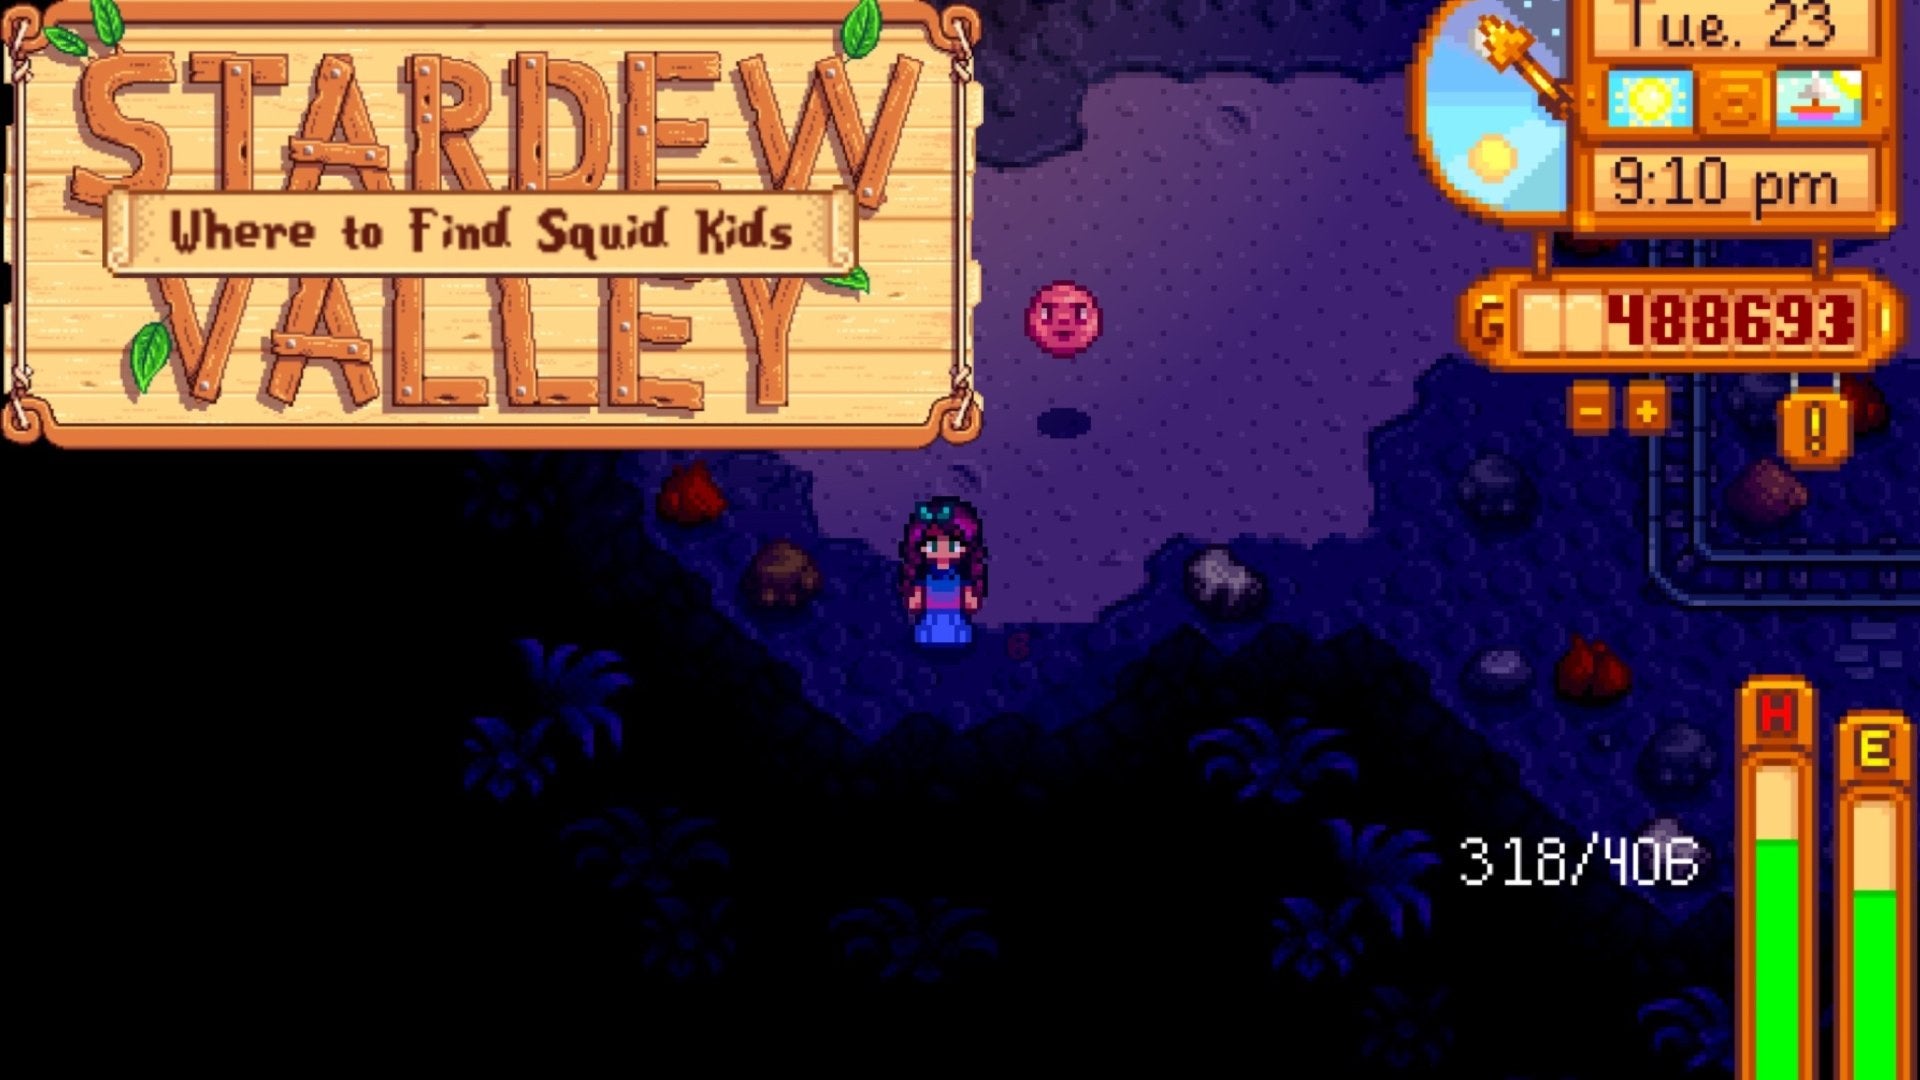 The Stardew Valley logo depicted next to a player and a Squid Kid in the Mines.